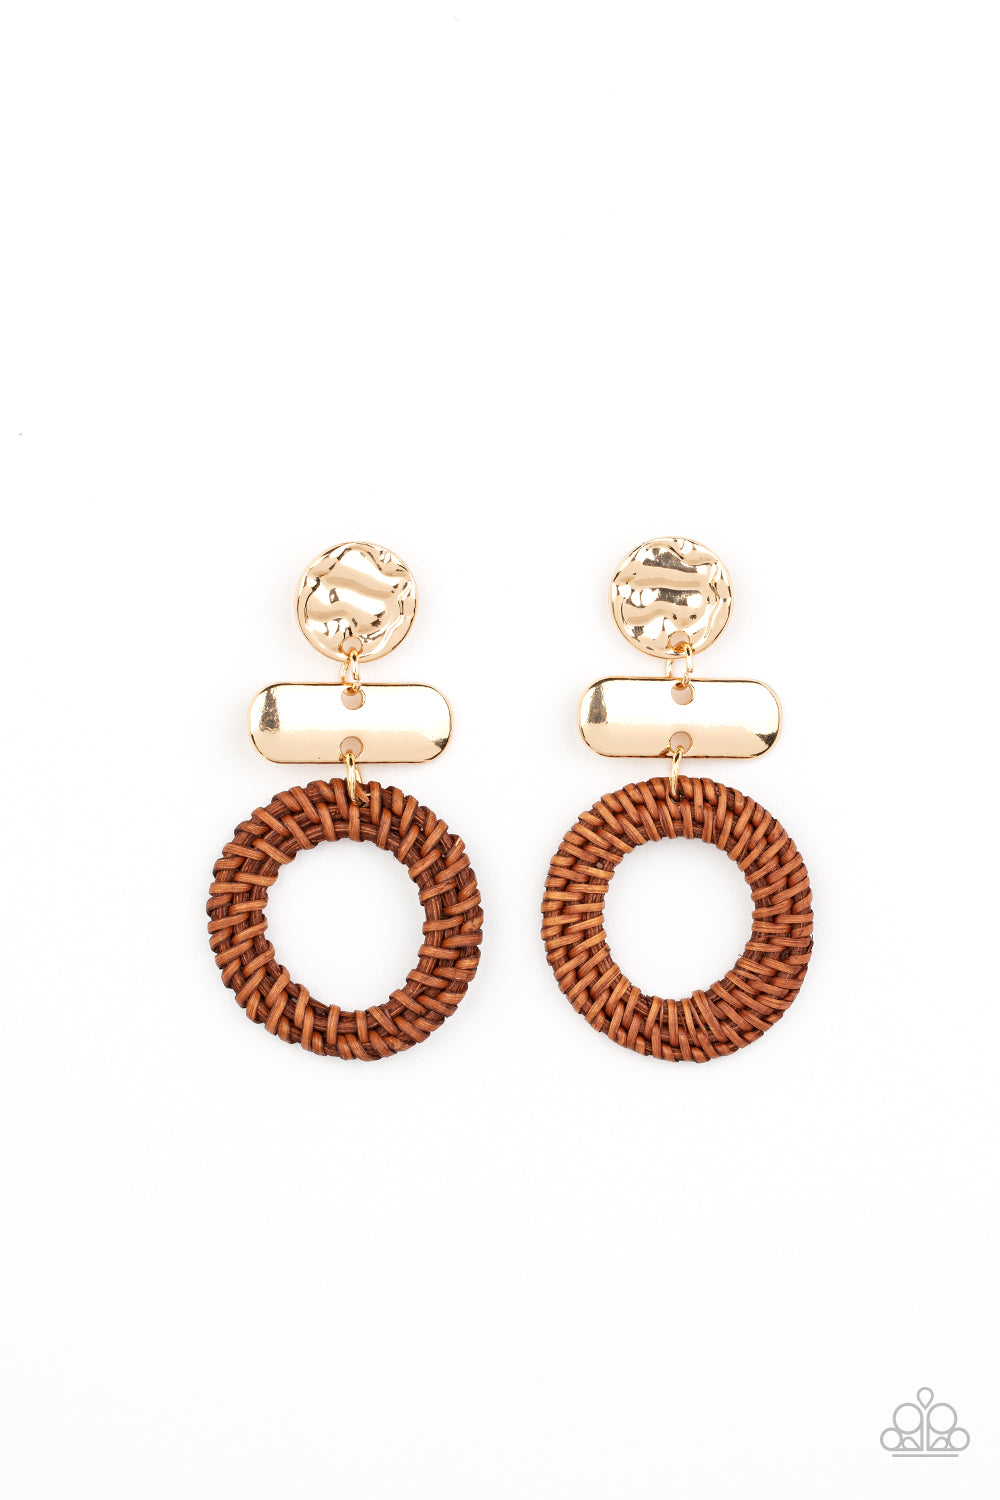 Woven Whimsicality Gold Earring - Paparazzi Accessories  A brown wicker-like hoop swings from the bottom of mismatched stacked gold frames, creating an earthy display. Earring attaches to a standard post fitting.  Sold as one pair of post earrings.